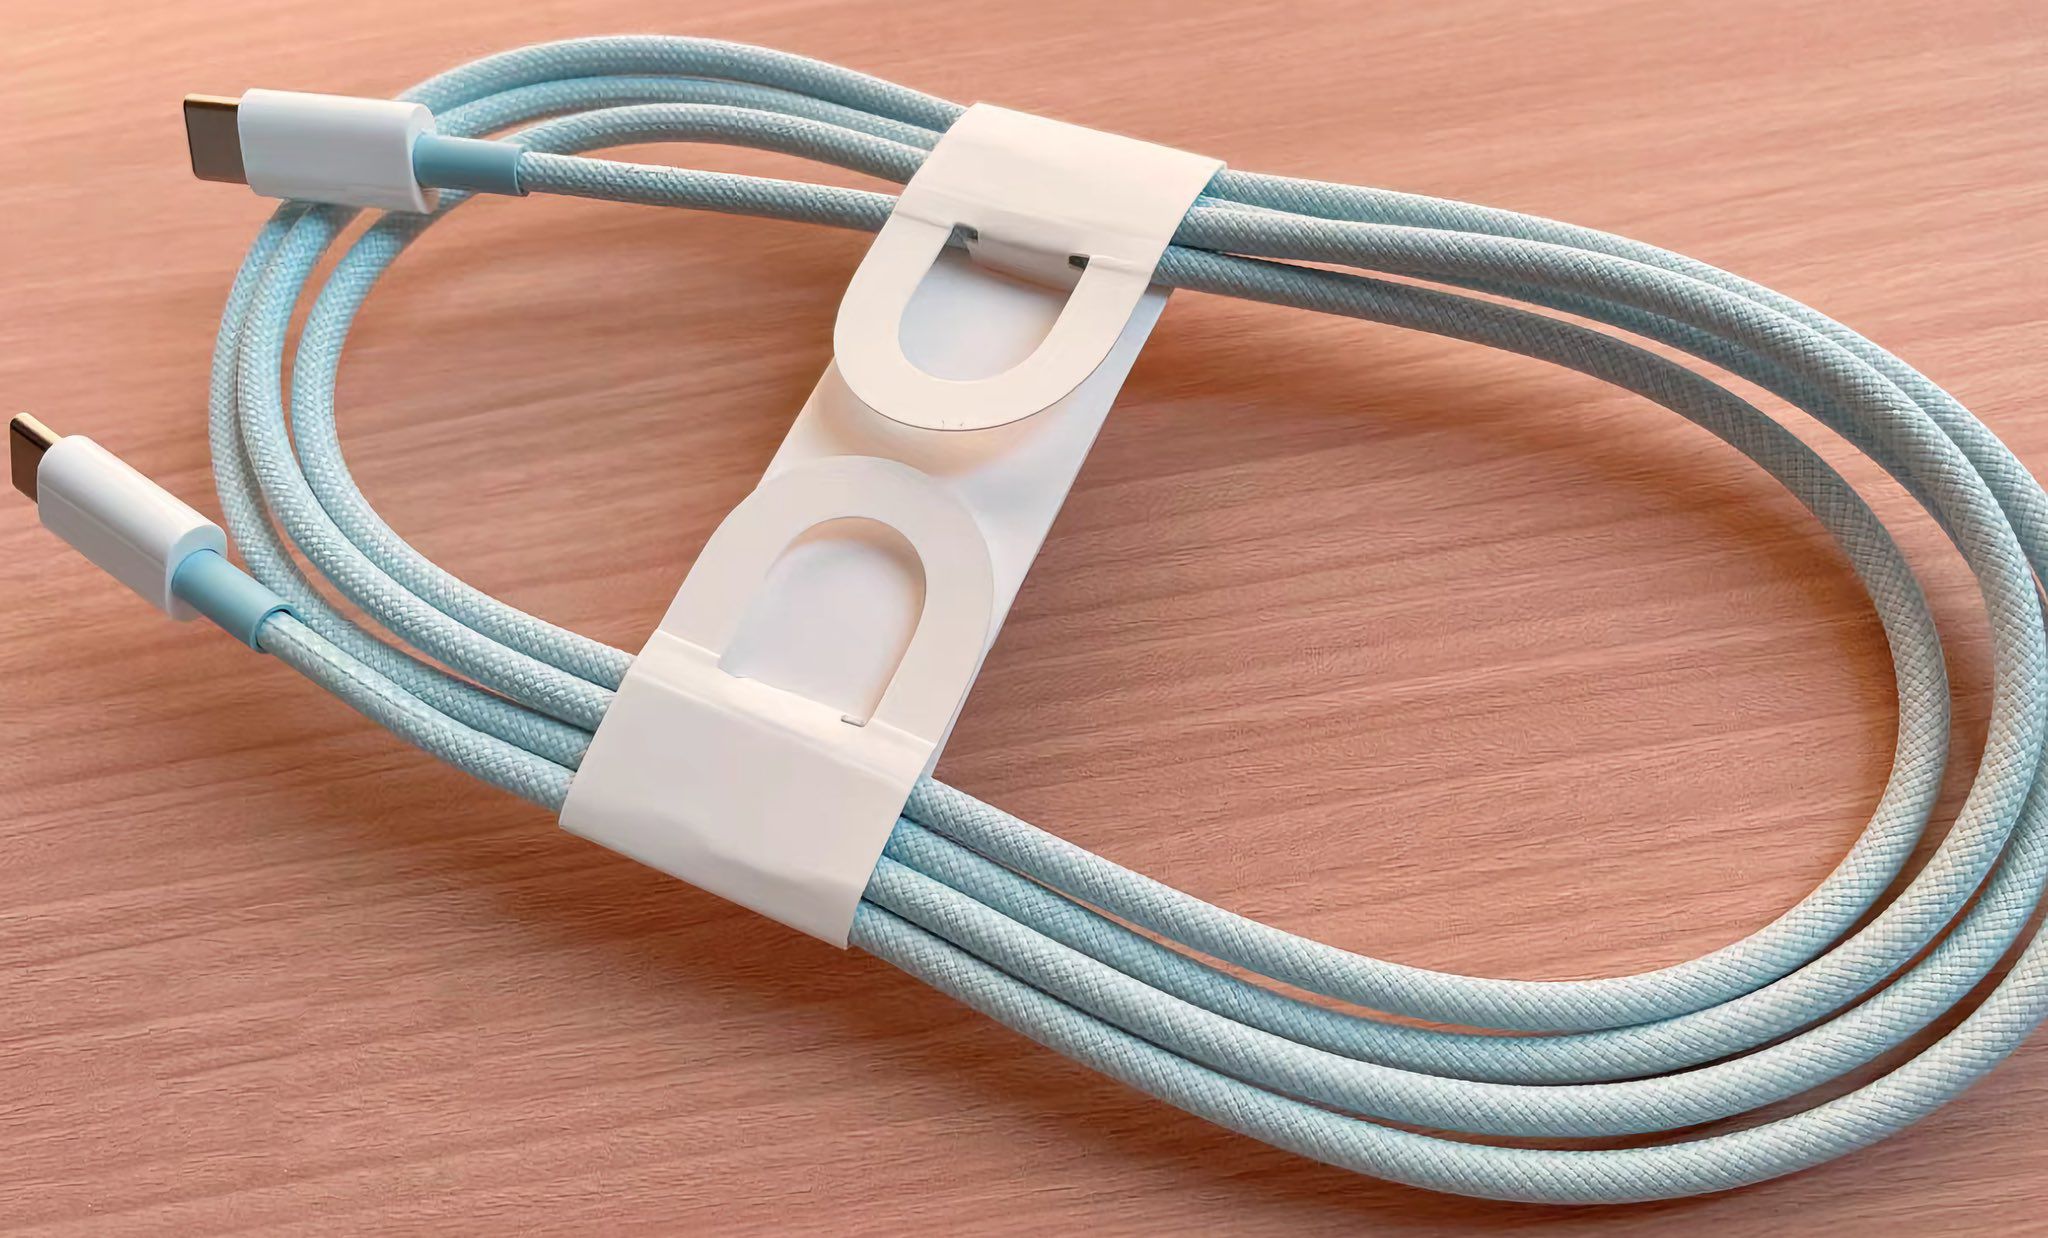 Once again, iPhone 15 USB-C cables are said to be limited to USB 2.0 transfer speeds